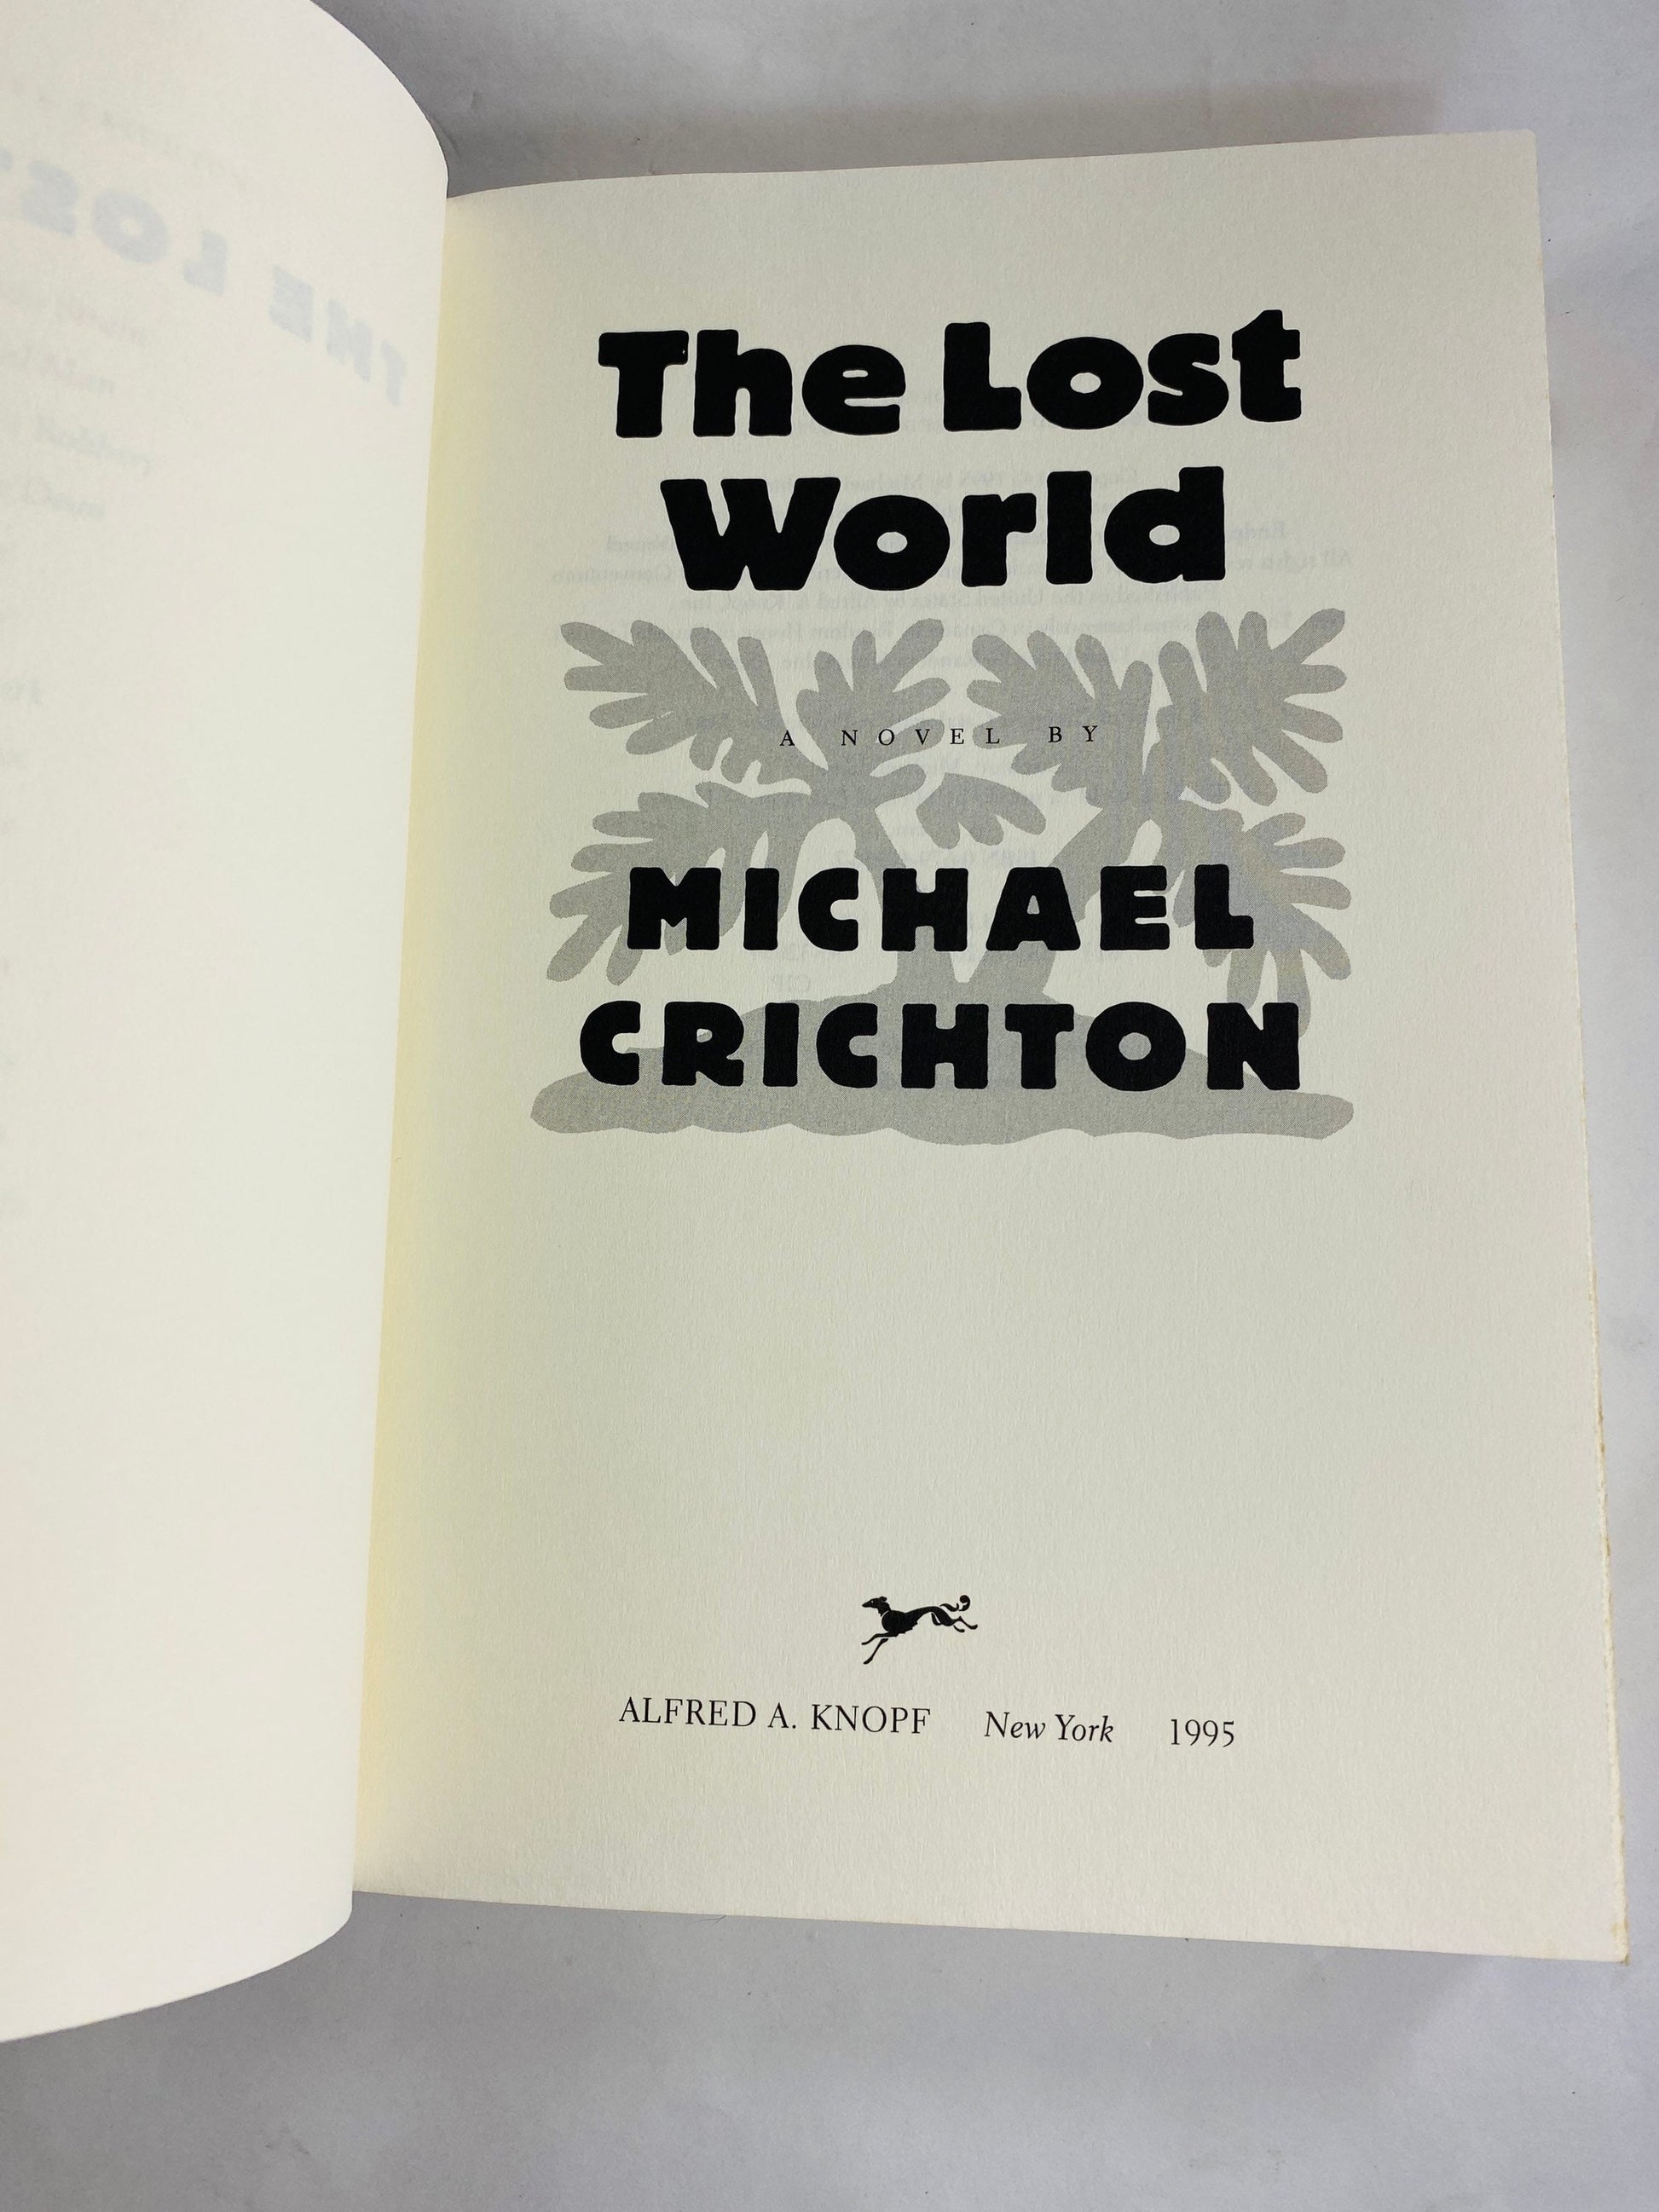 Lost World by Michael Crichton. FIRST Trade EDITION vintage book circa 1995. Sequel to Jurassic Park.